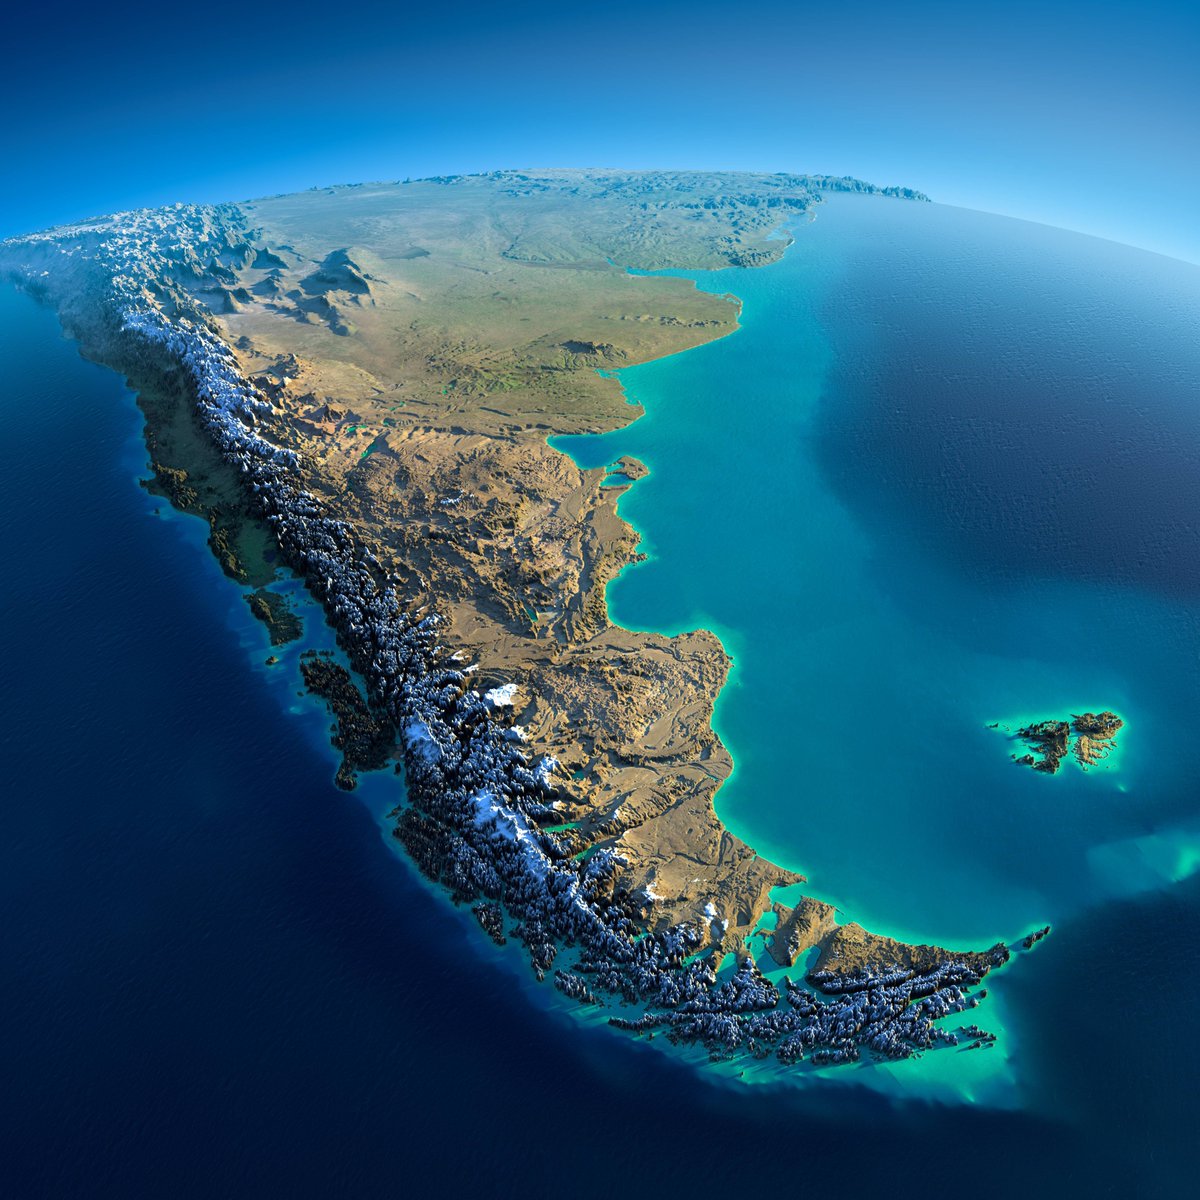 Relief map of Patagonia 🇦🇷🇨🇱